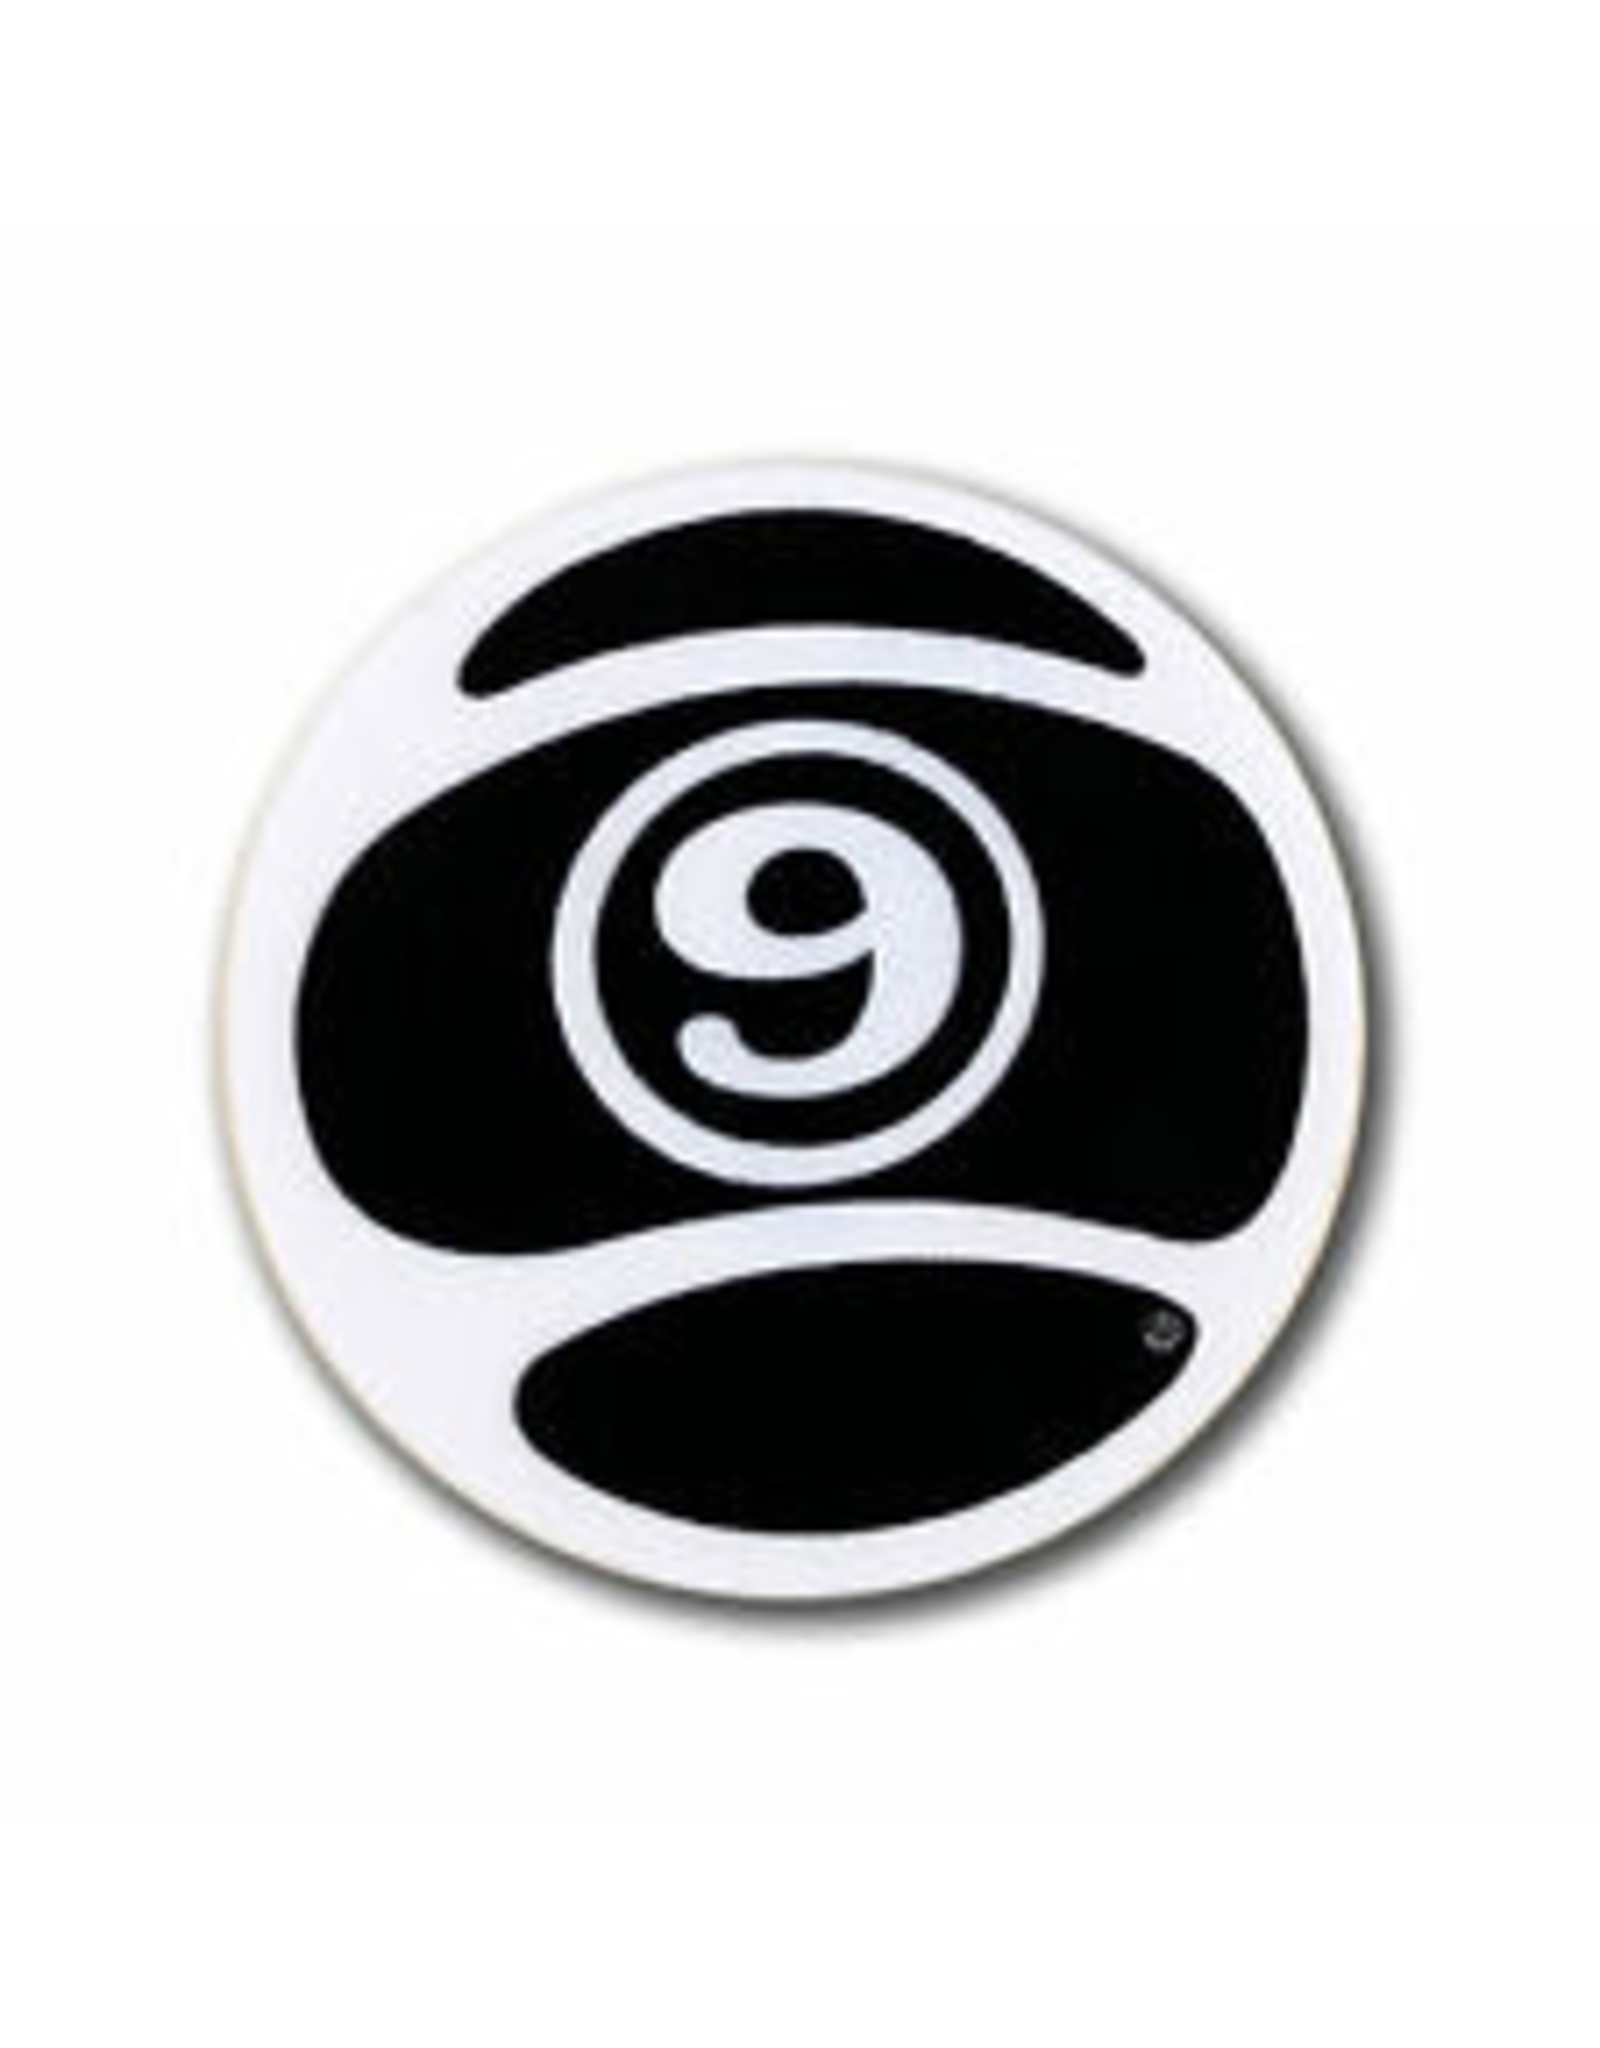 SECTOR 9 SECTOR 9 LARGE 9 BALL STICKER